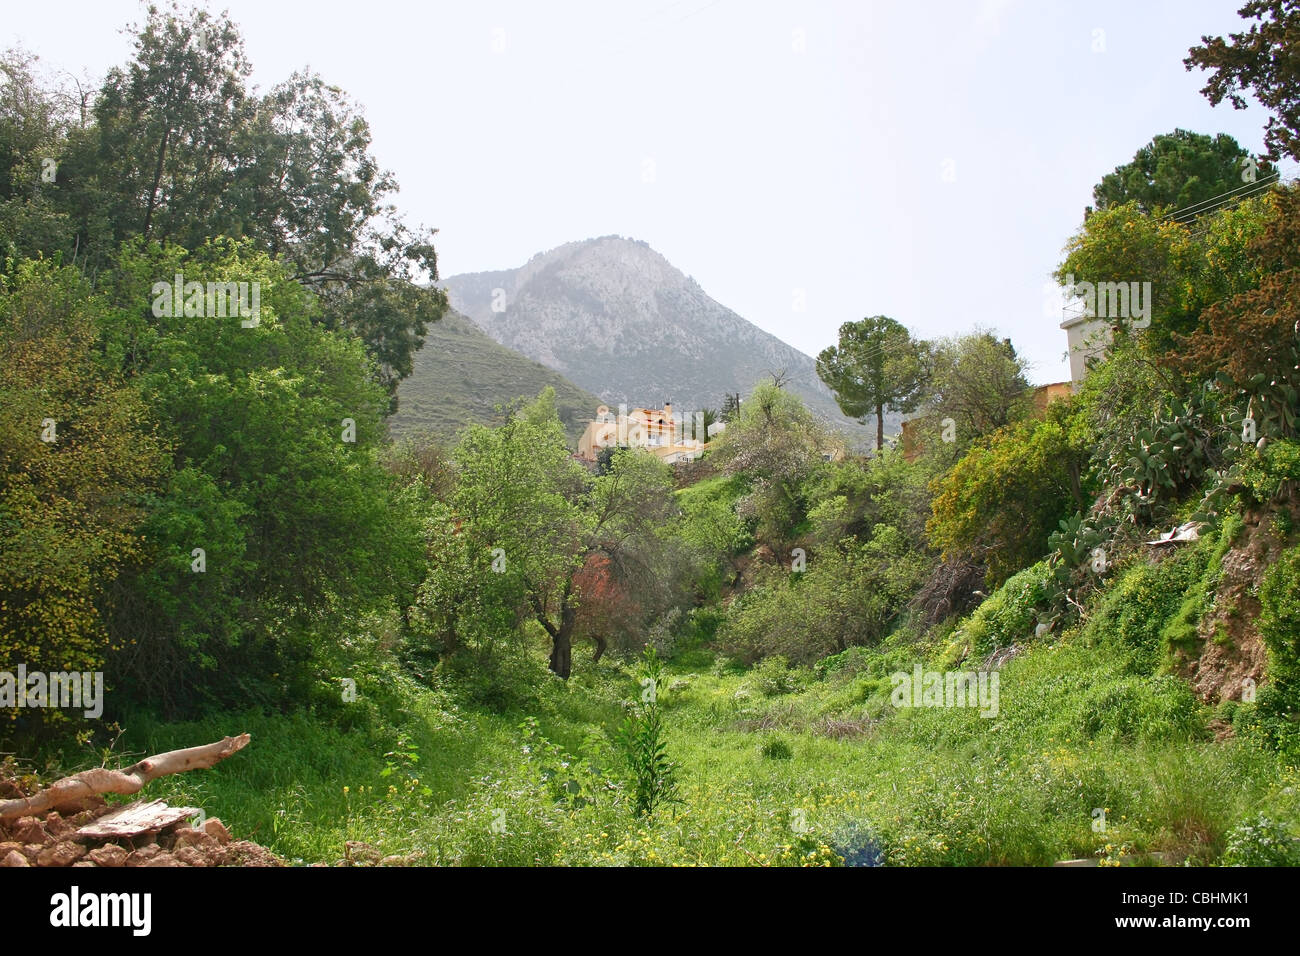 Cyprus landscape with gardens,mountain village, trees. Stock Photo